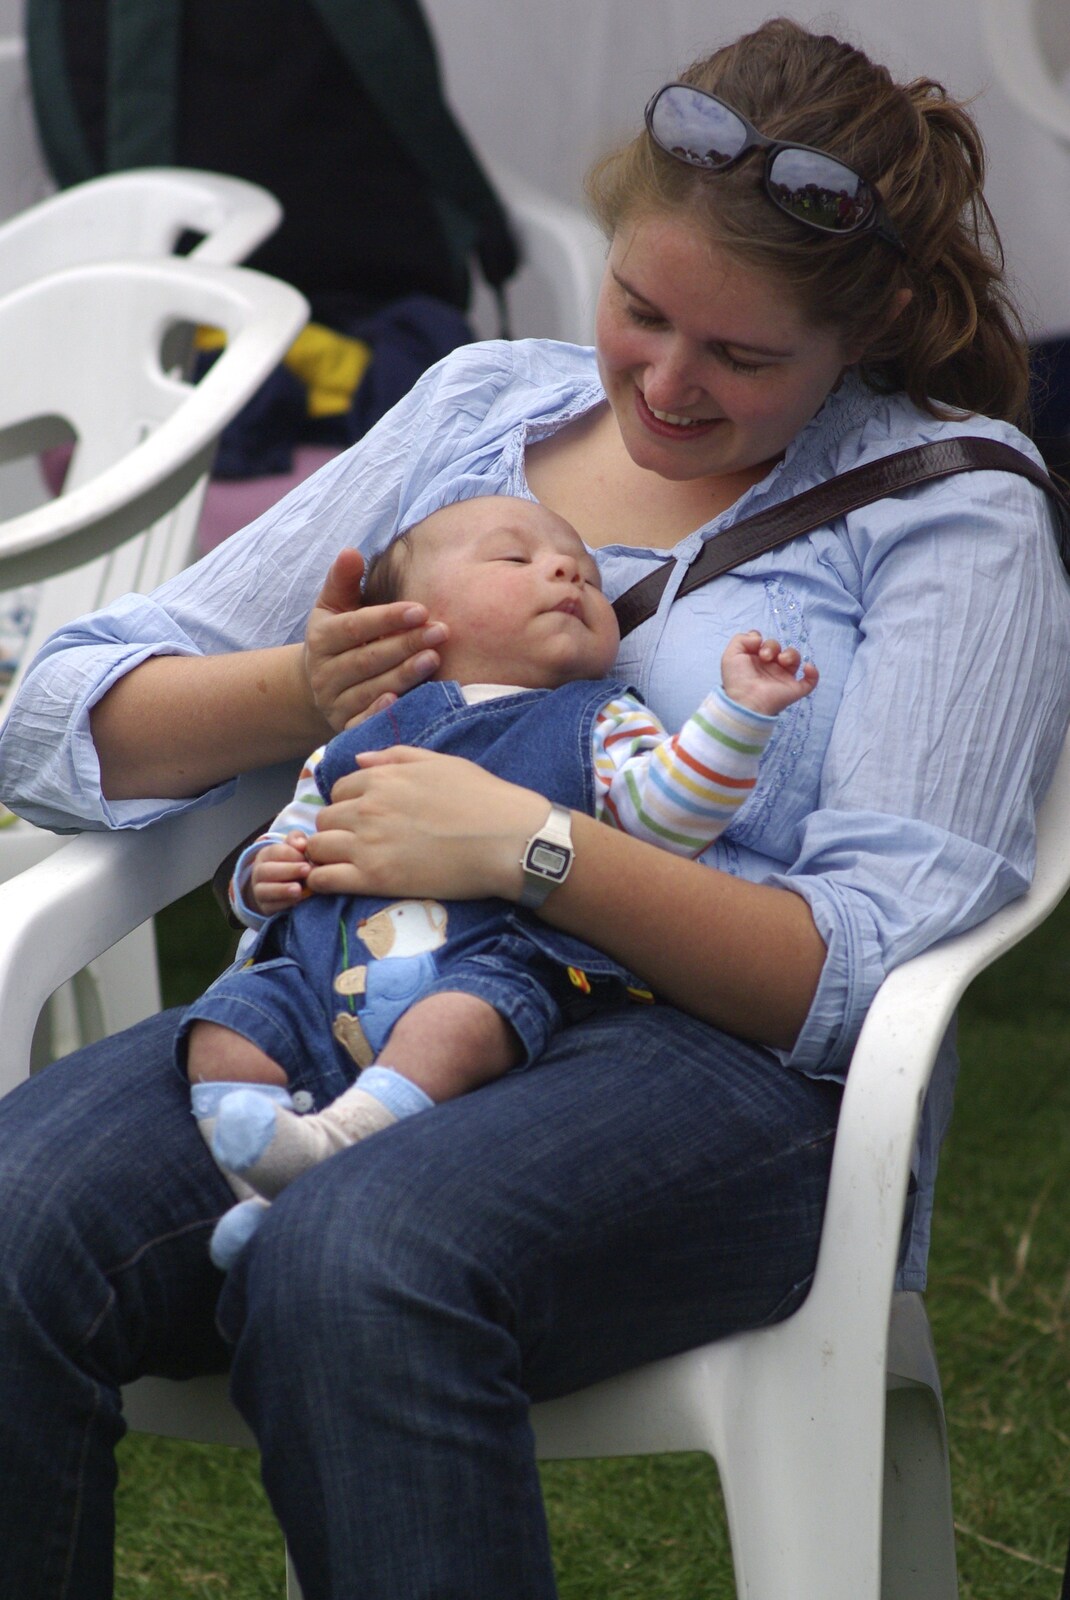 Qualcomm's Dragon-Boat Racing, Fen Ditton, Cambridge - 8th September 2007: Isobel borrows a baby for a bit